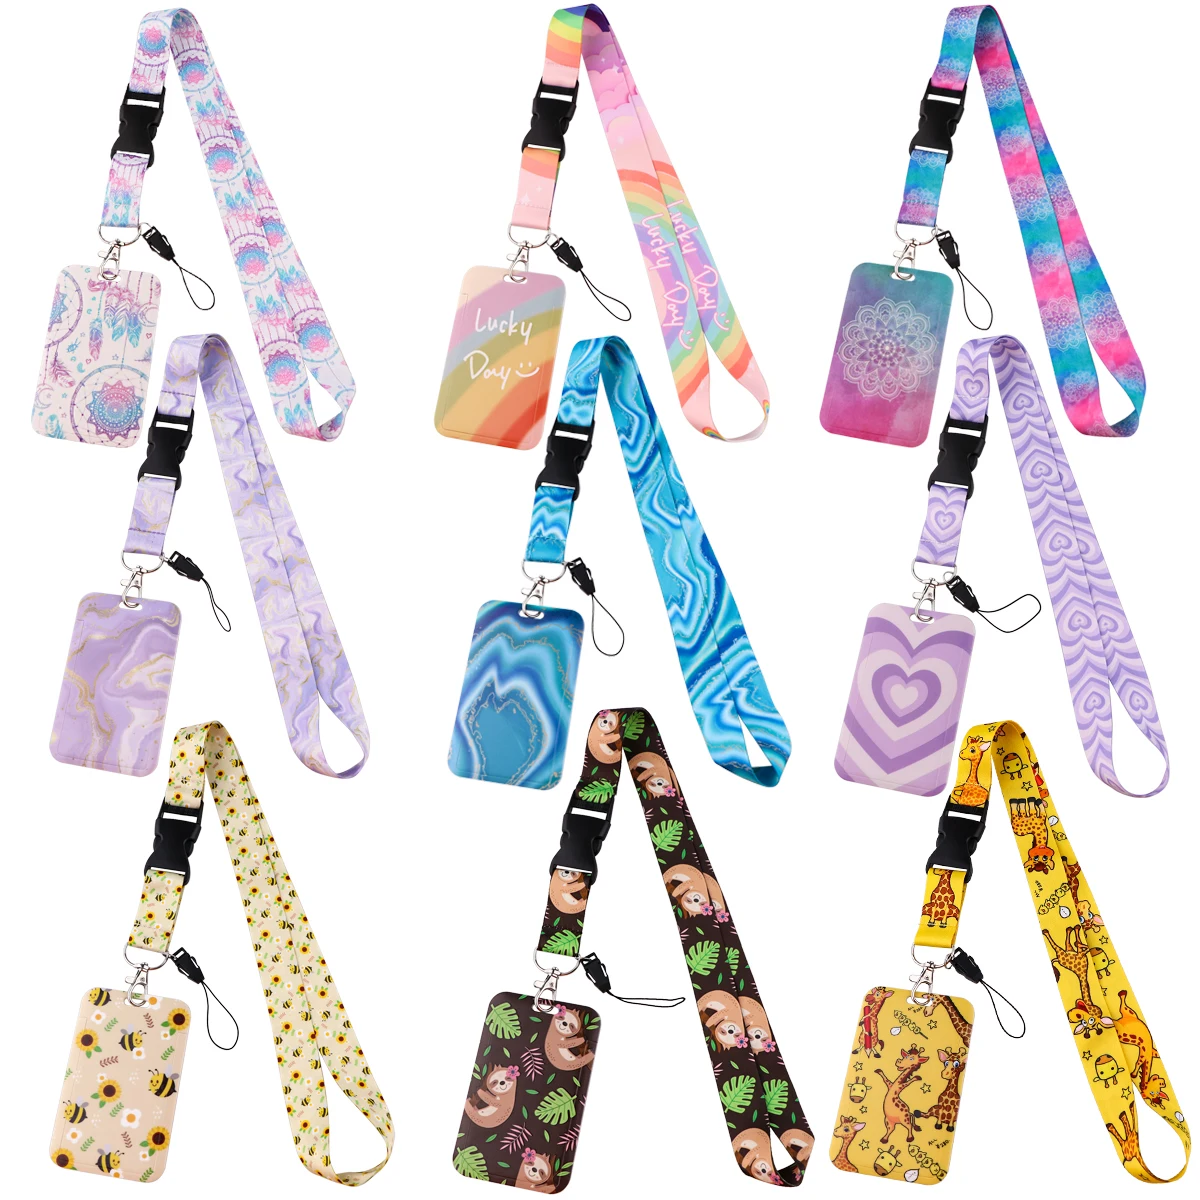 Marble Printing Lanyards for Keys Neck Strap ID Card Gym Cell Phone Straps USB Badge Holder DIY Hang Rope Neckband Accessories flyingbee x2004 pink cherry blossoms neck strap lanyard for keys id card gym mobile phone straps usb badge holder diy hang rope